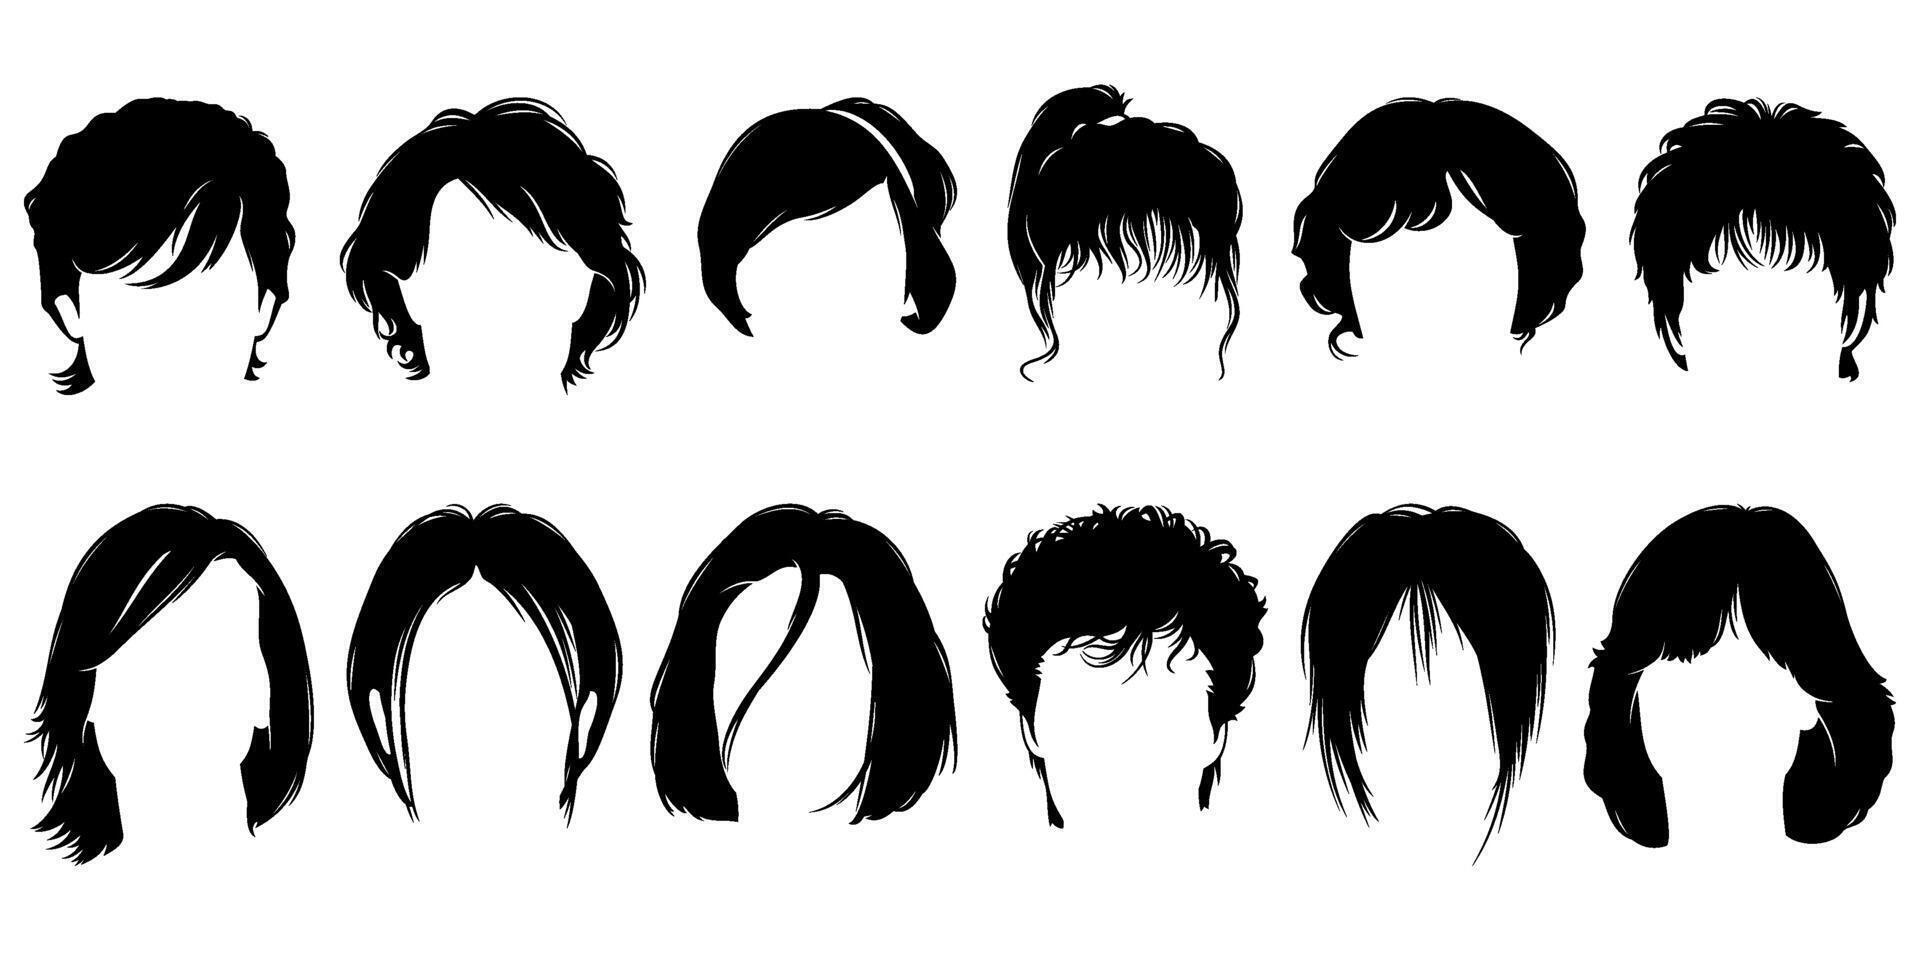 Woman Hair Silhouettes. Short Hairstyles. Vector cliparts isolated on white.